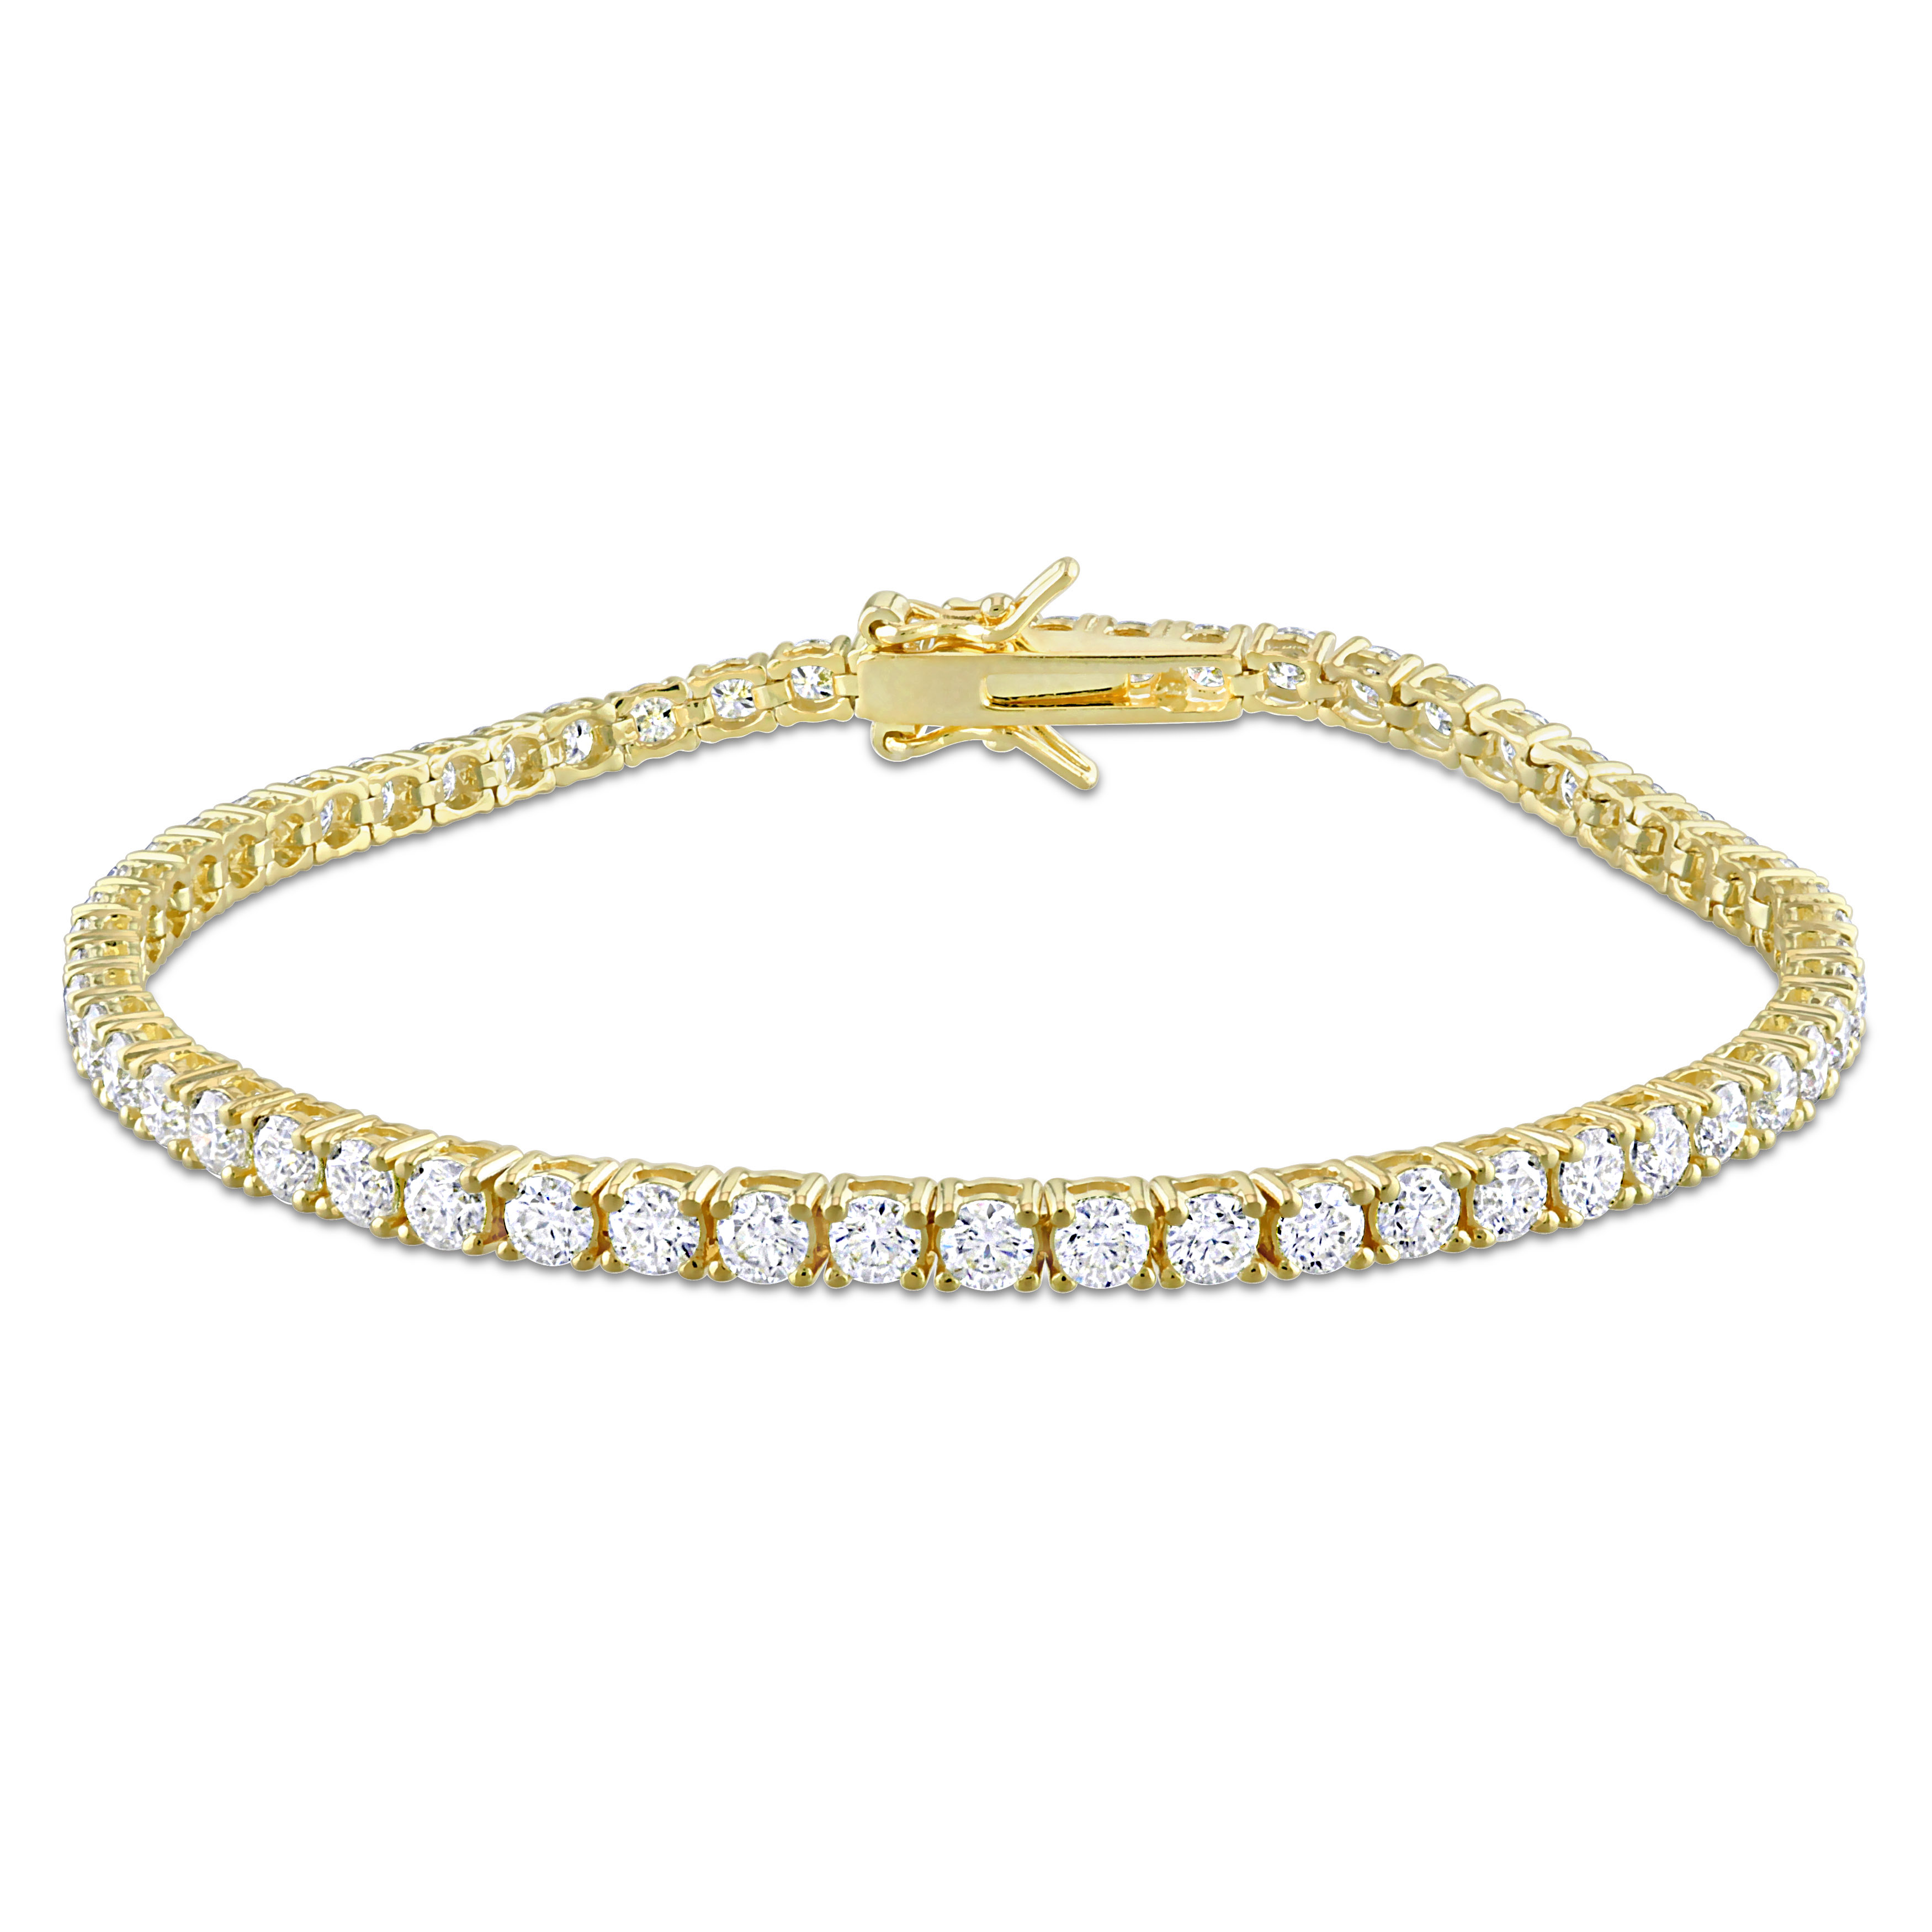 5 5/8 CT TGW Created Moissanite Tennis Bracelet in Yellow Plated Sterling Silver - 8 in.